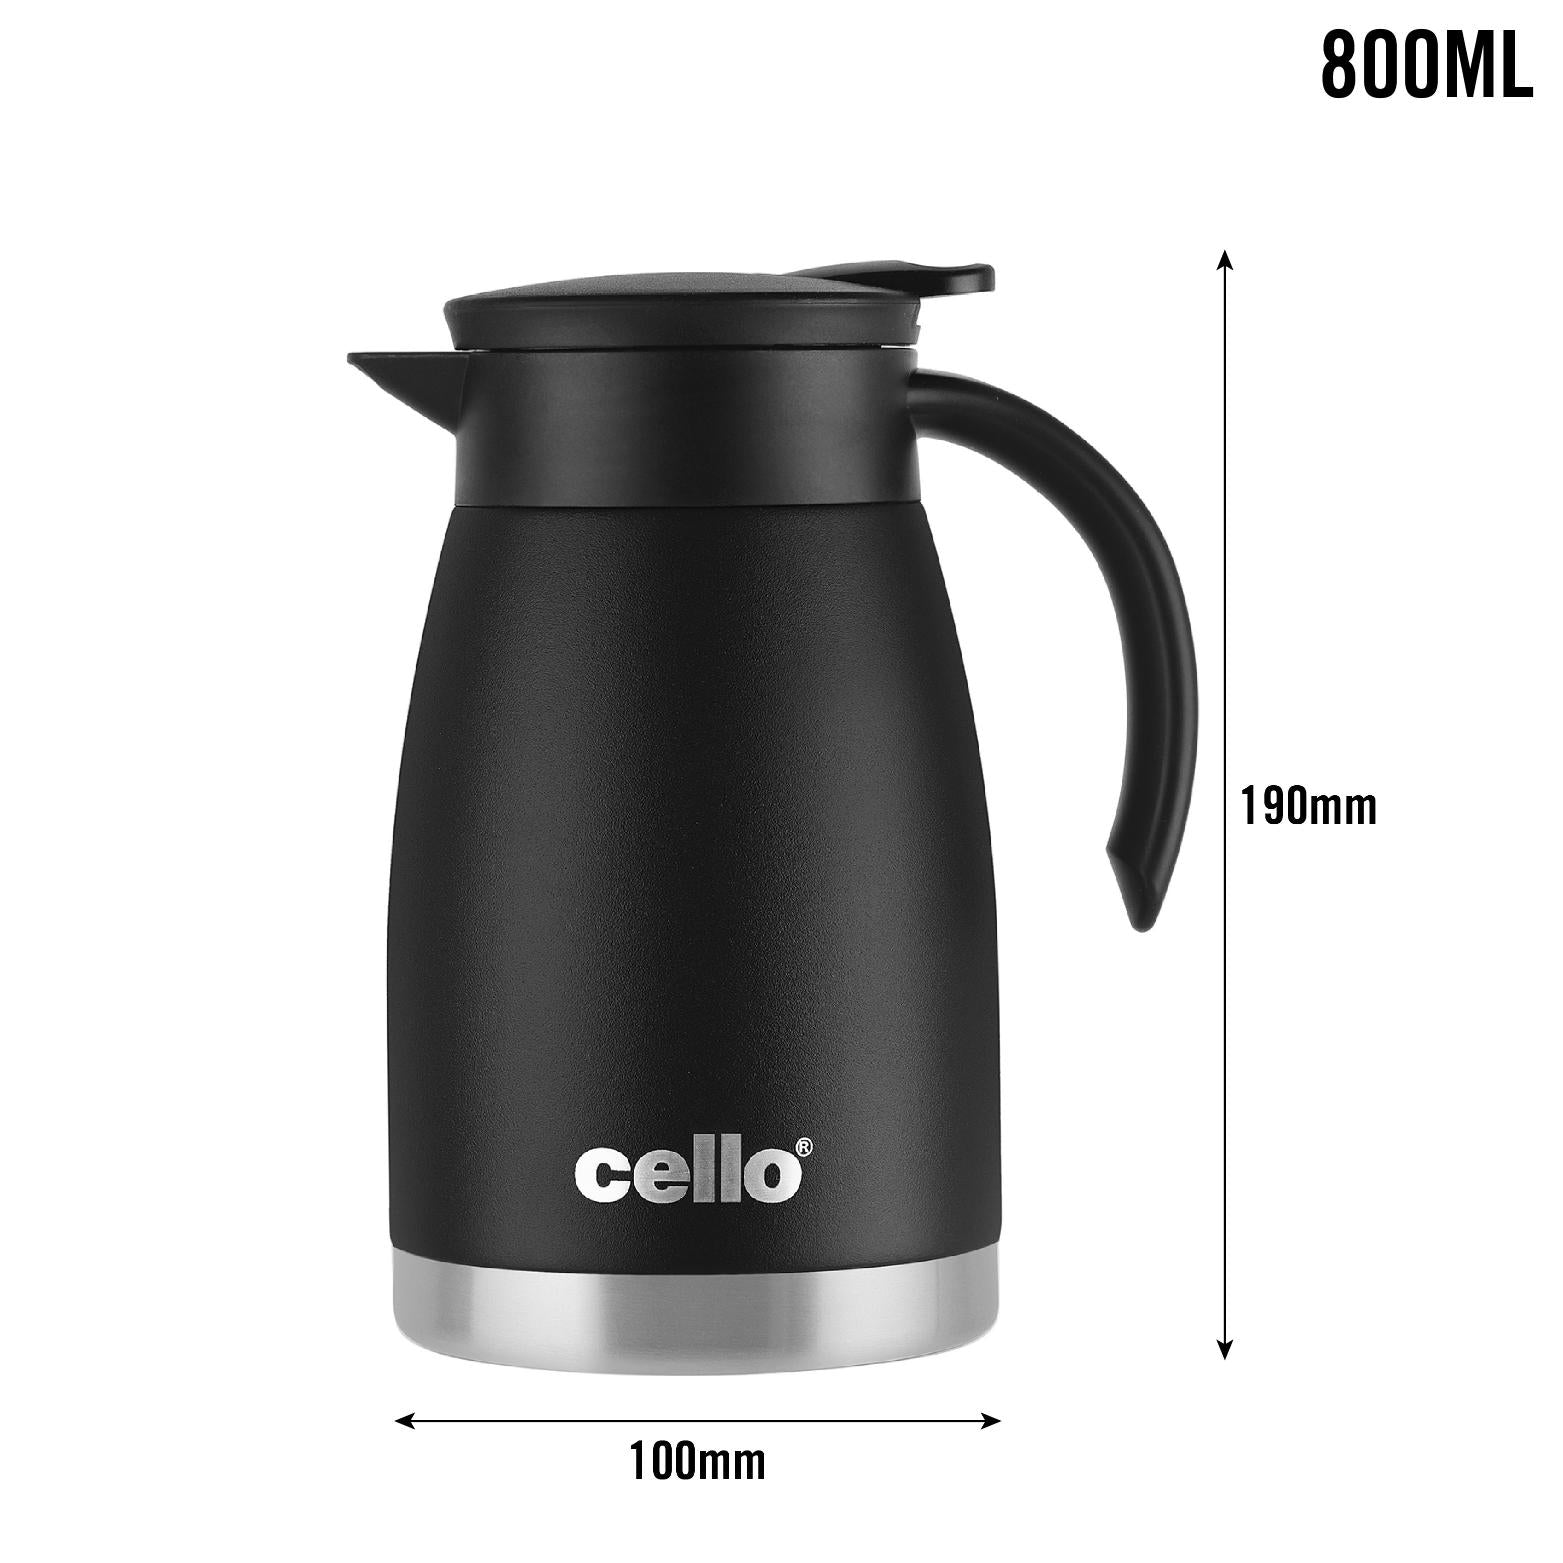 Duro Pot Double Walled Vacuum Insulated Teapot, 800ml Black / 800ml / 1 Piece